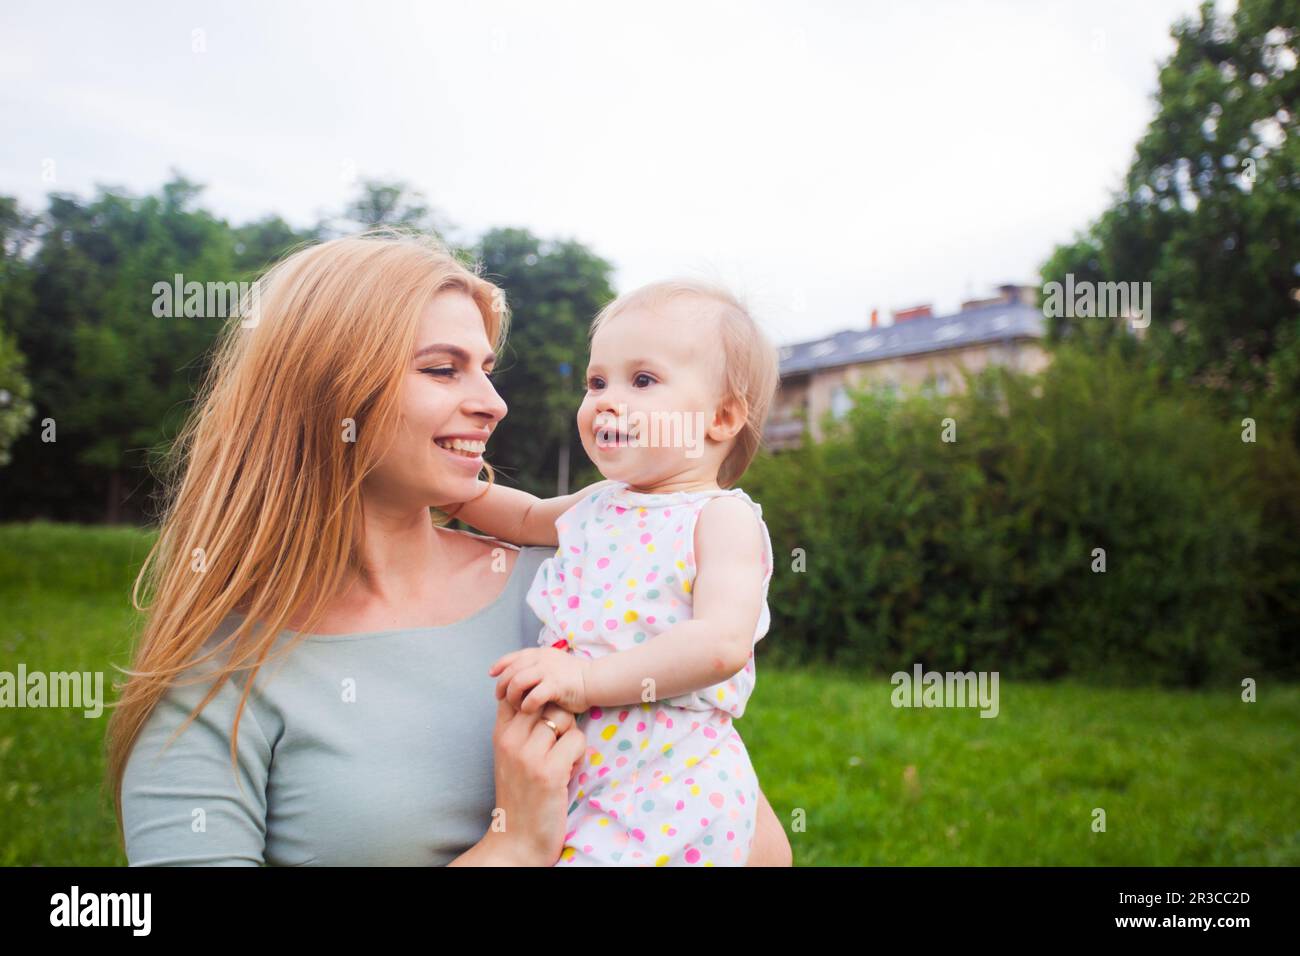 The mom and her baby have fun together outdoors Stock Photo